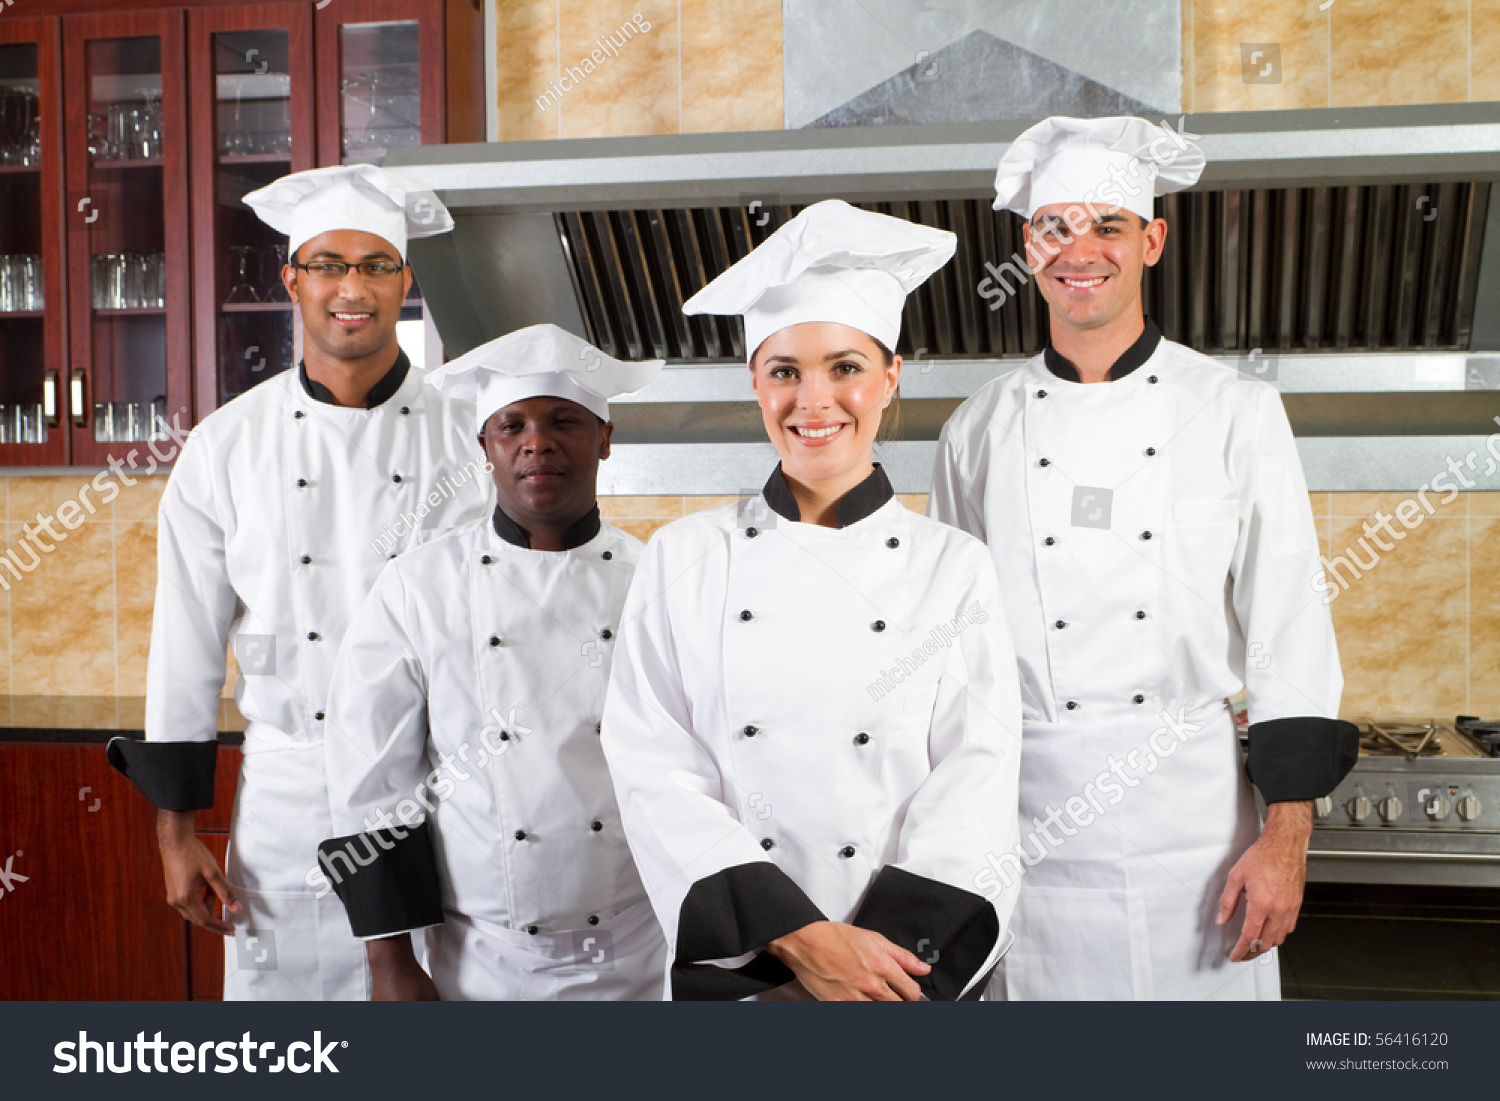 Stock Photo Group Of Professional Chefs In Hotel Kitchen 56416120 